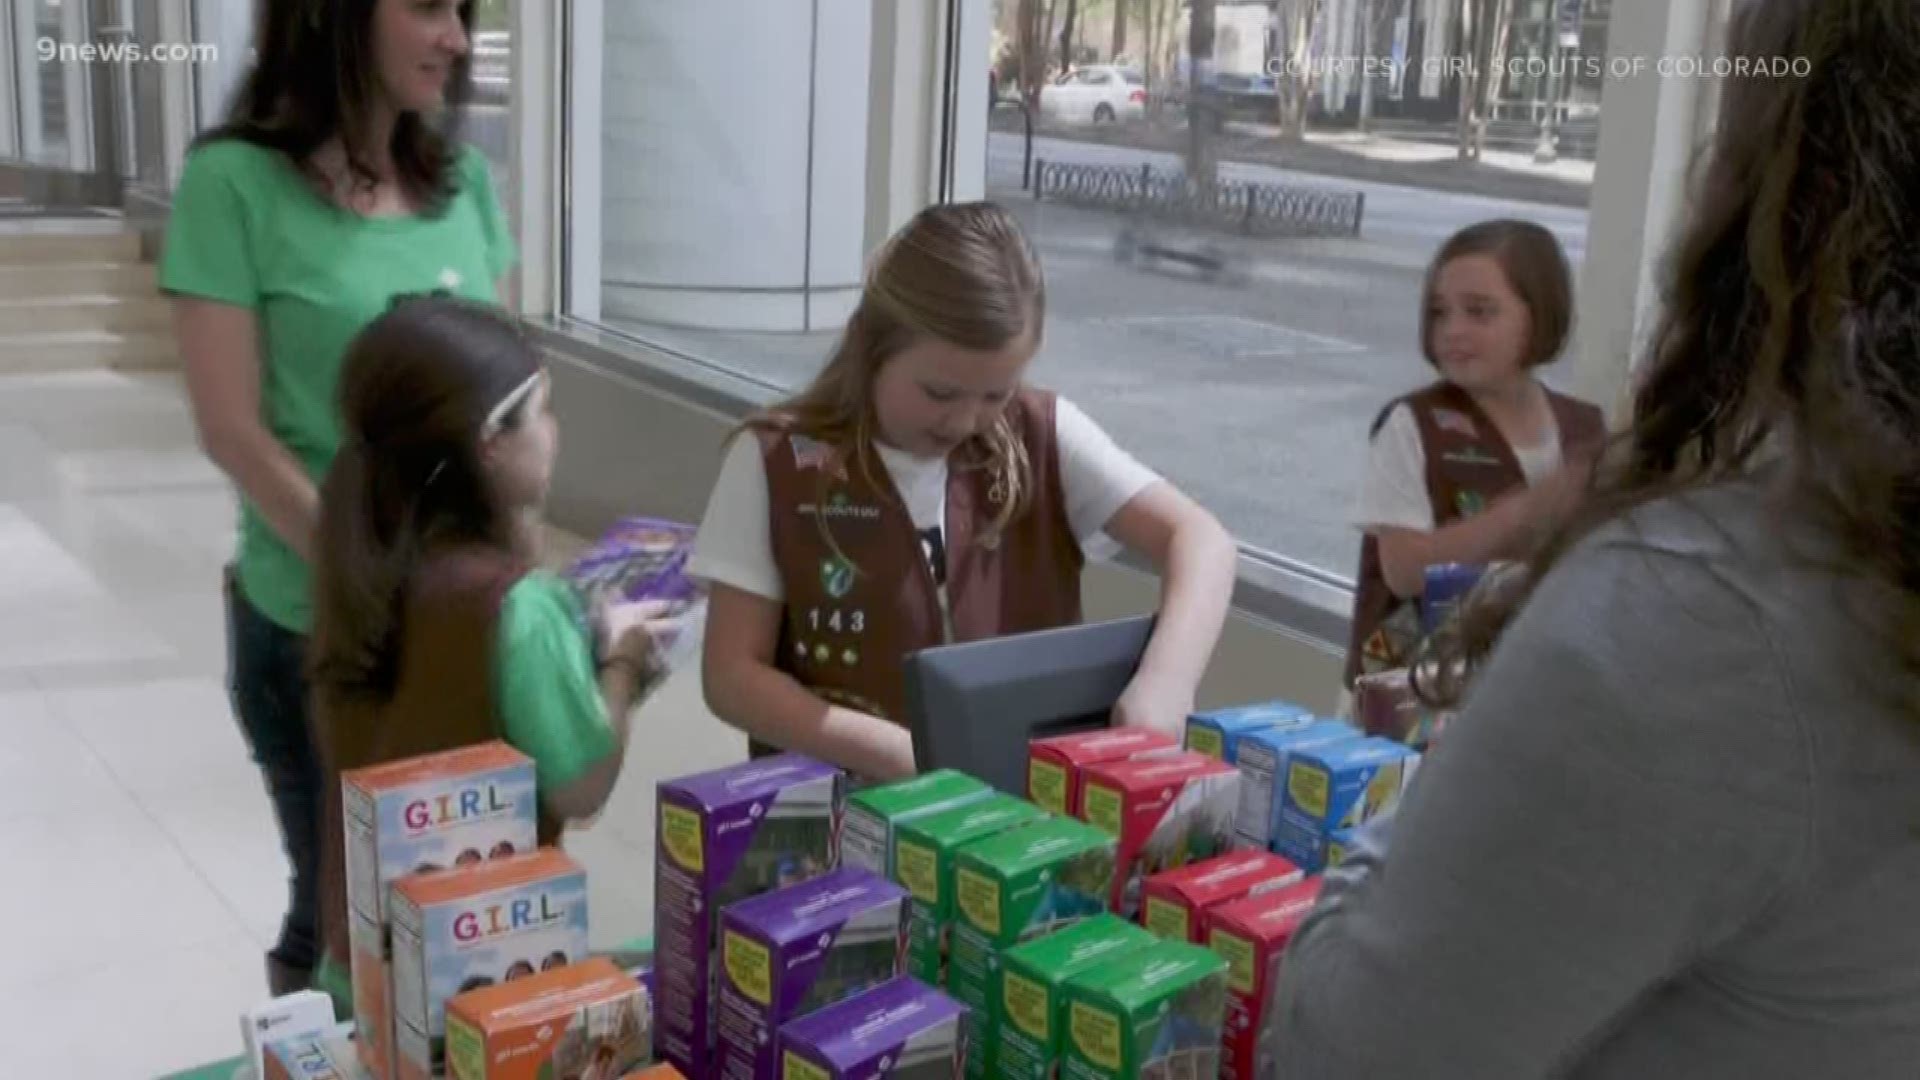 Girl Scout cookies will be available in Colorado starting Sunday, Feb. 2.